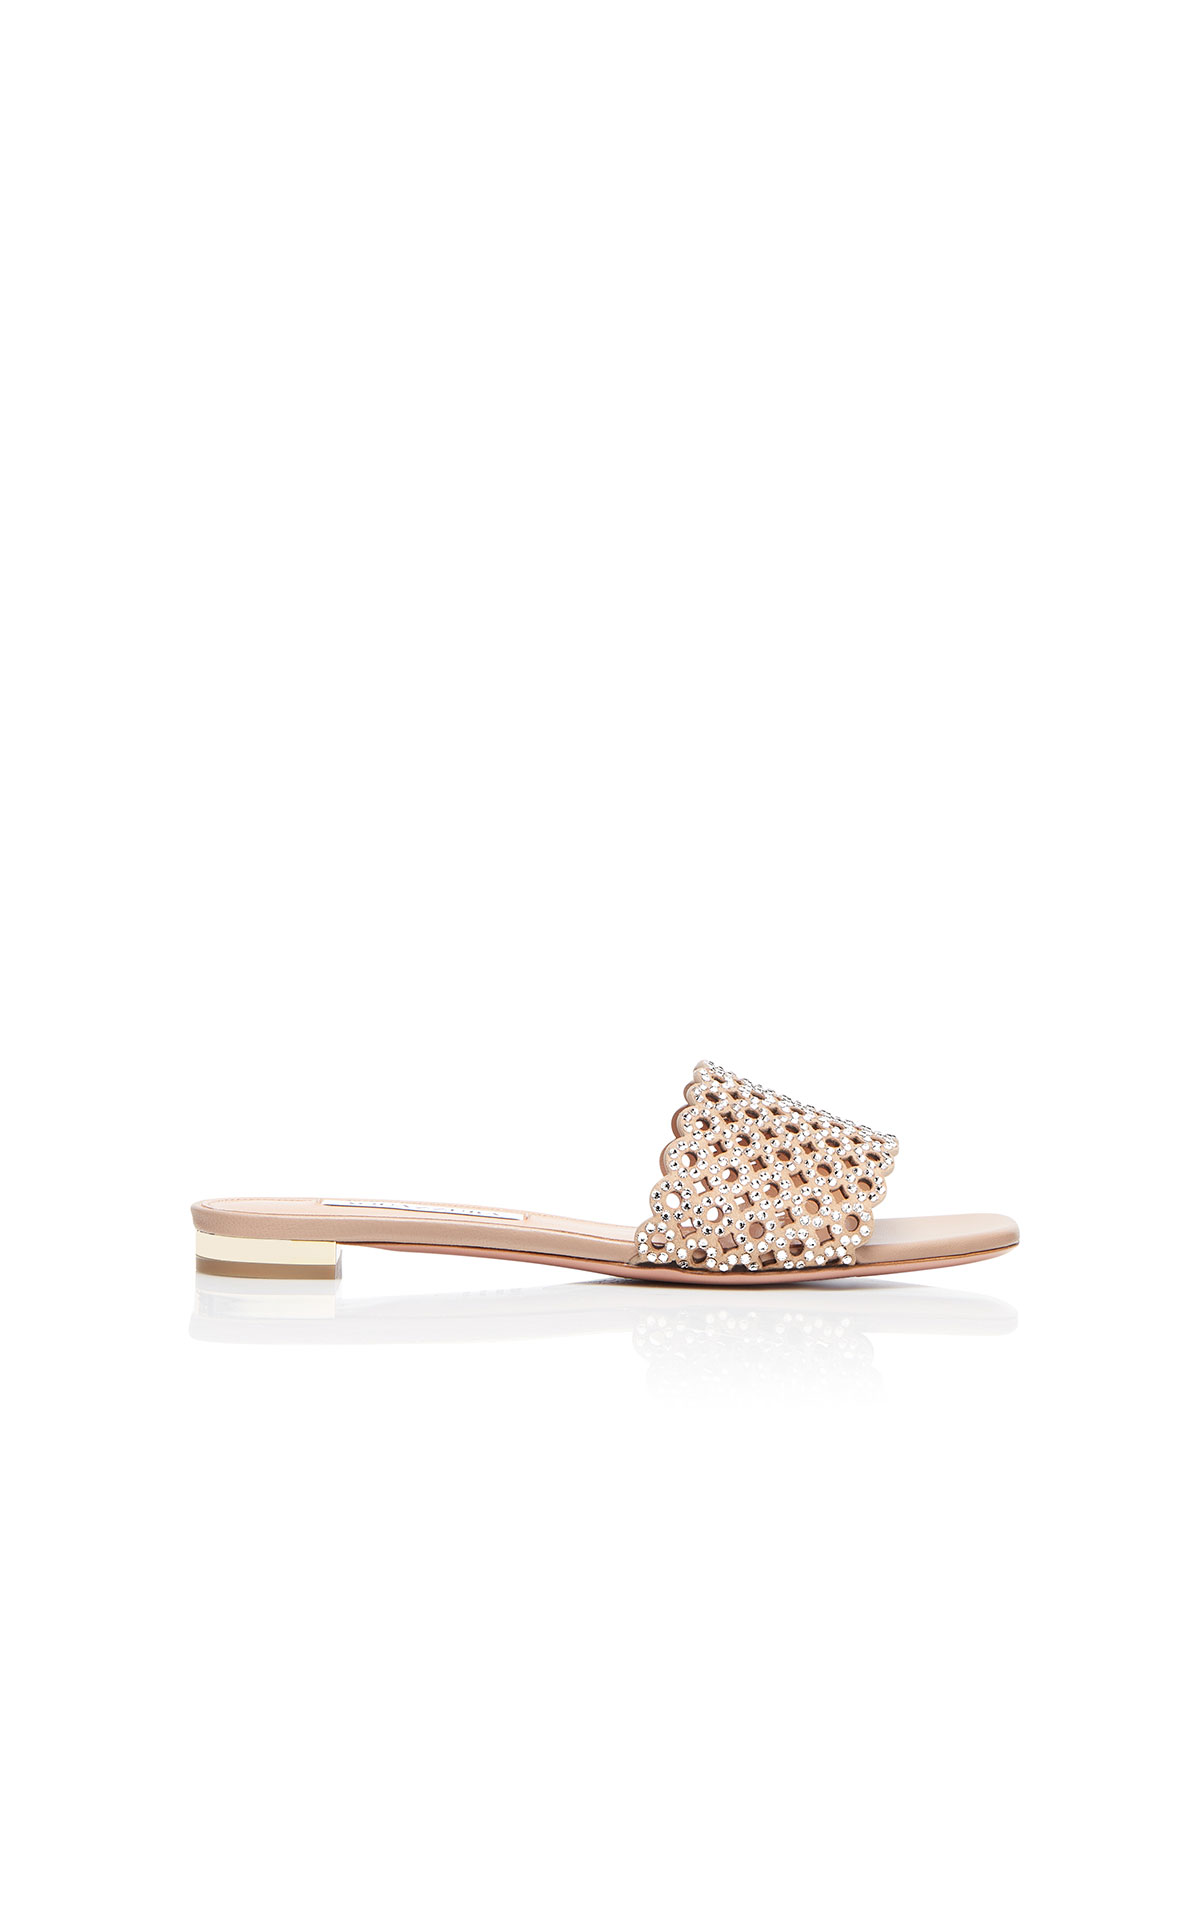 Aquazzura Crystal candy slide new nude from Bicester Village